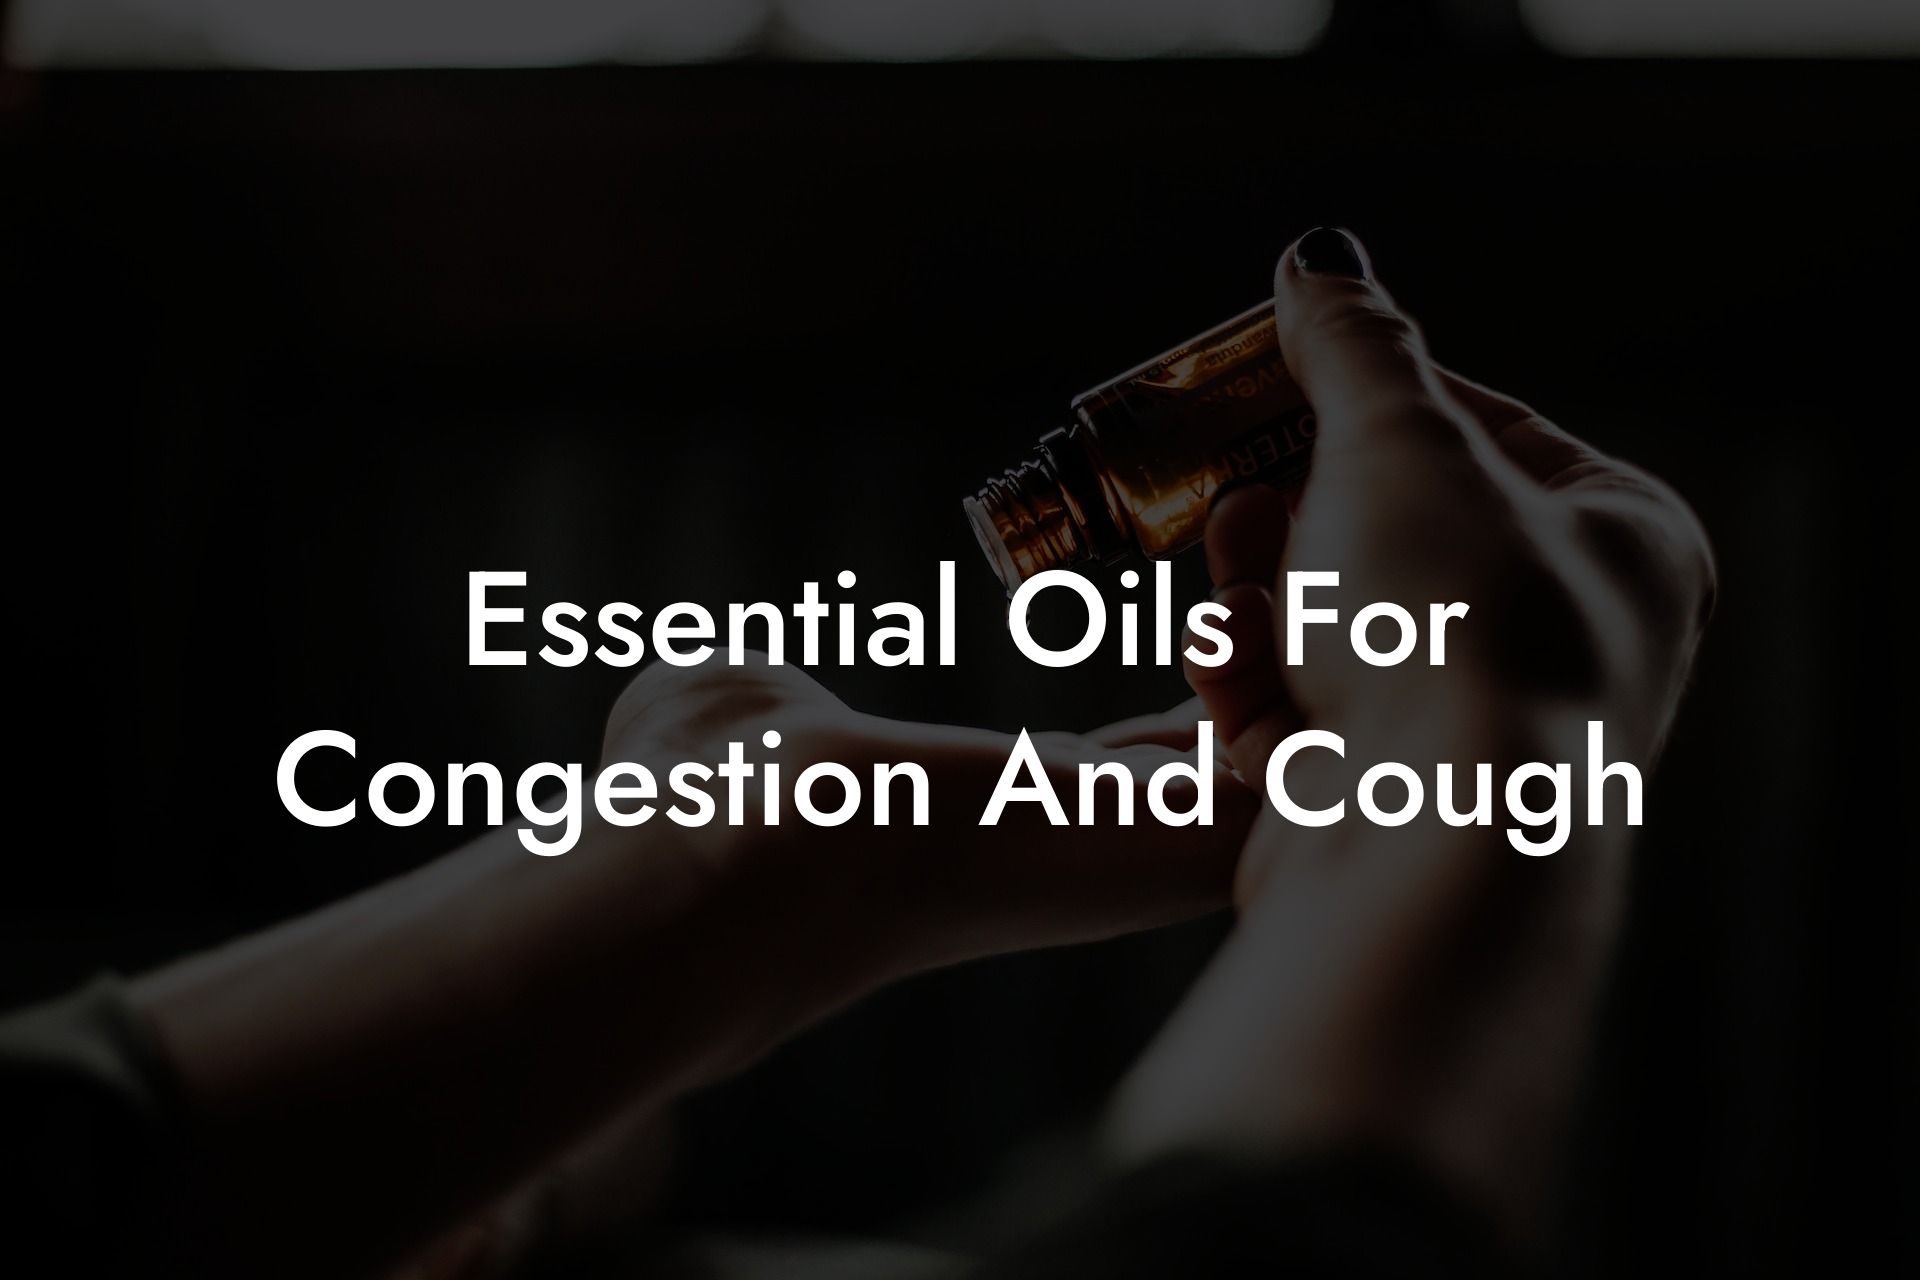 Essential Oils For Congestion And Cough